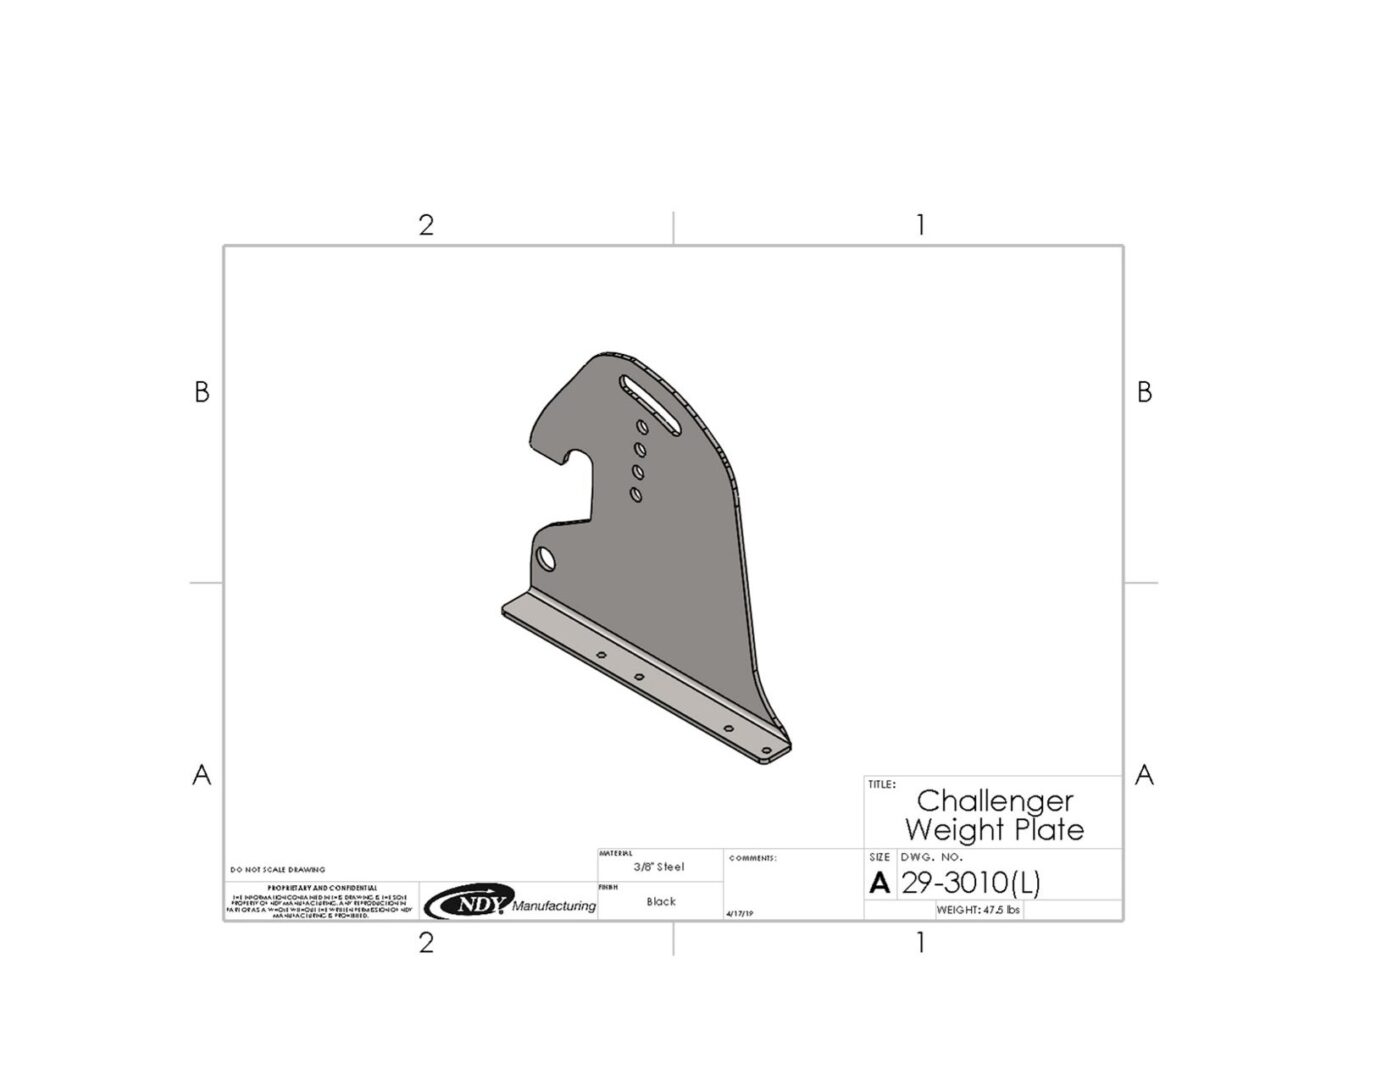 A drawing of a Rock Box Weight Plate, Left - fits Challenger.